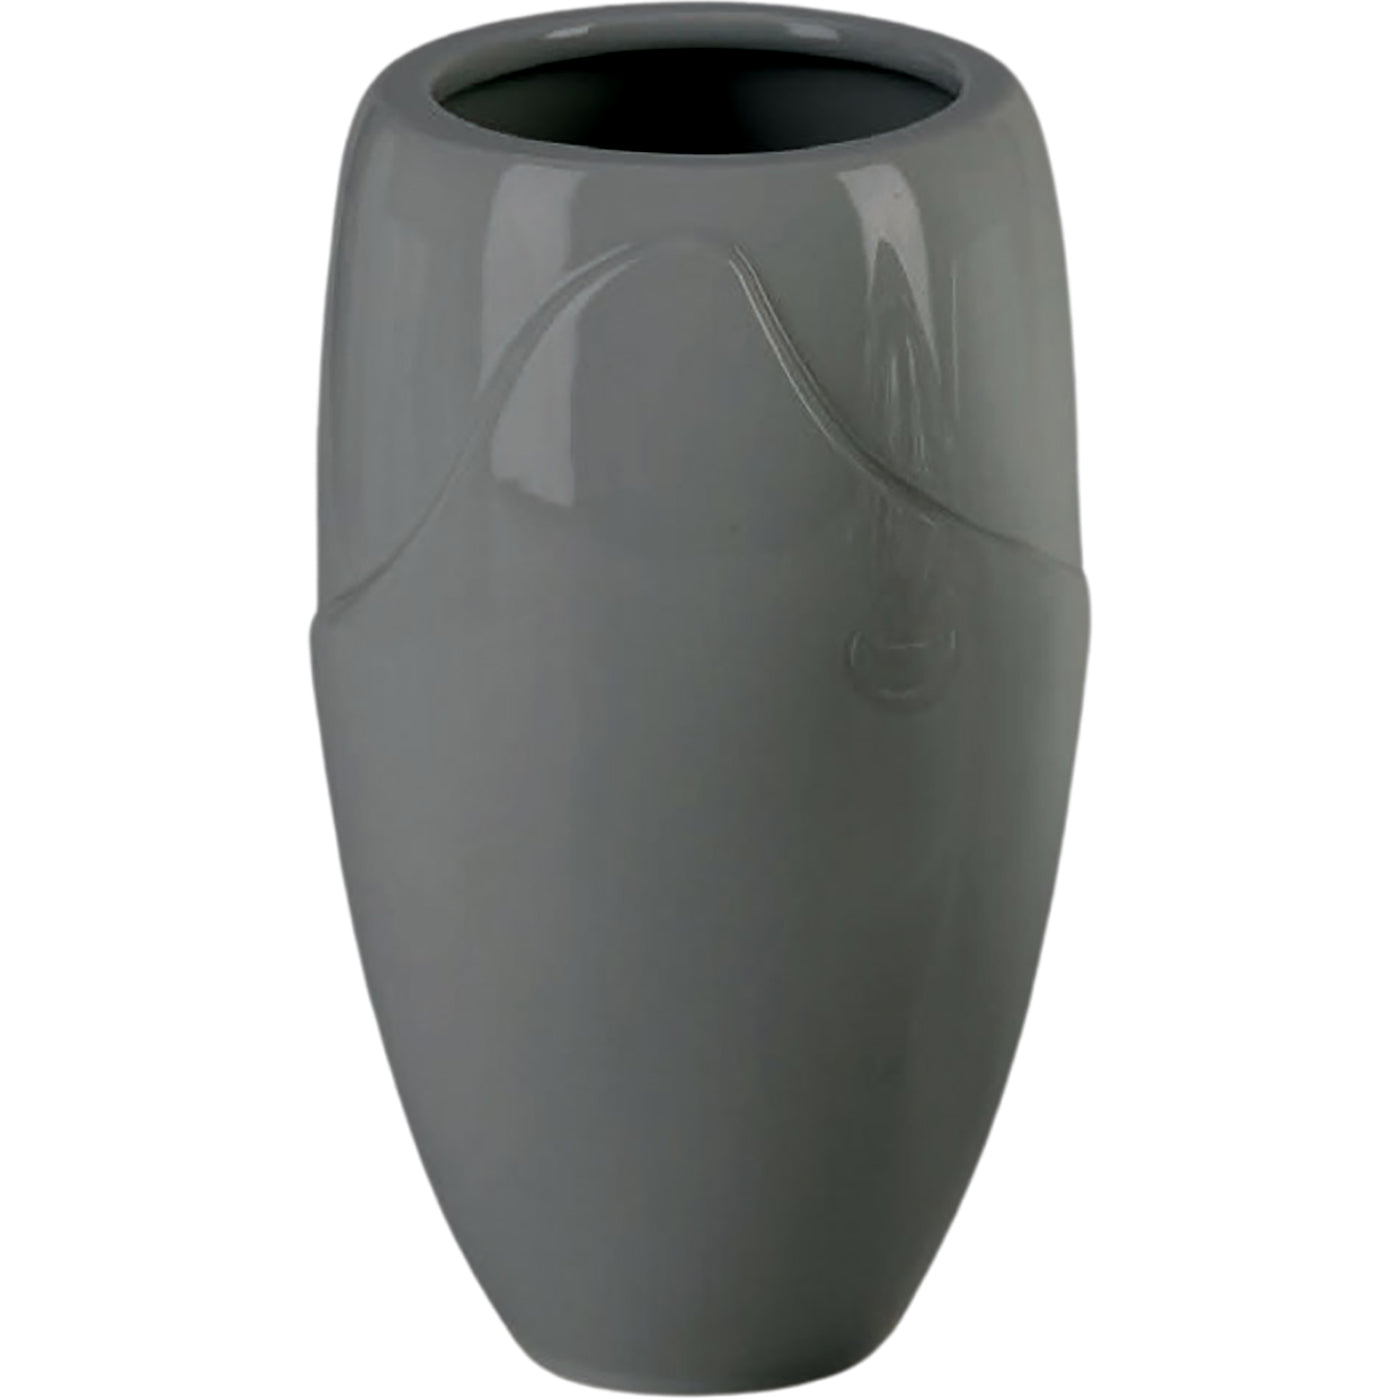 Grave vases Onda gray 21x13cm - 8.3x5.1in In gray porcelain, ground attached ON168T/G